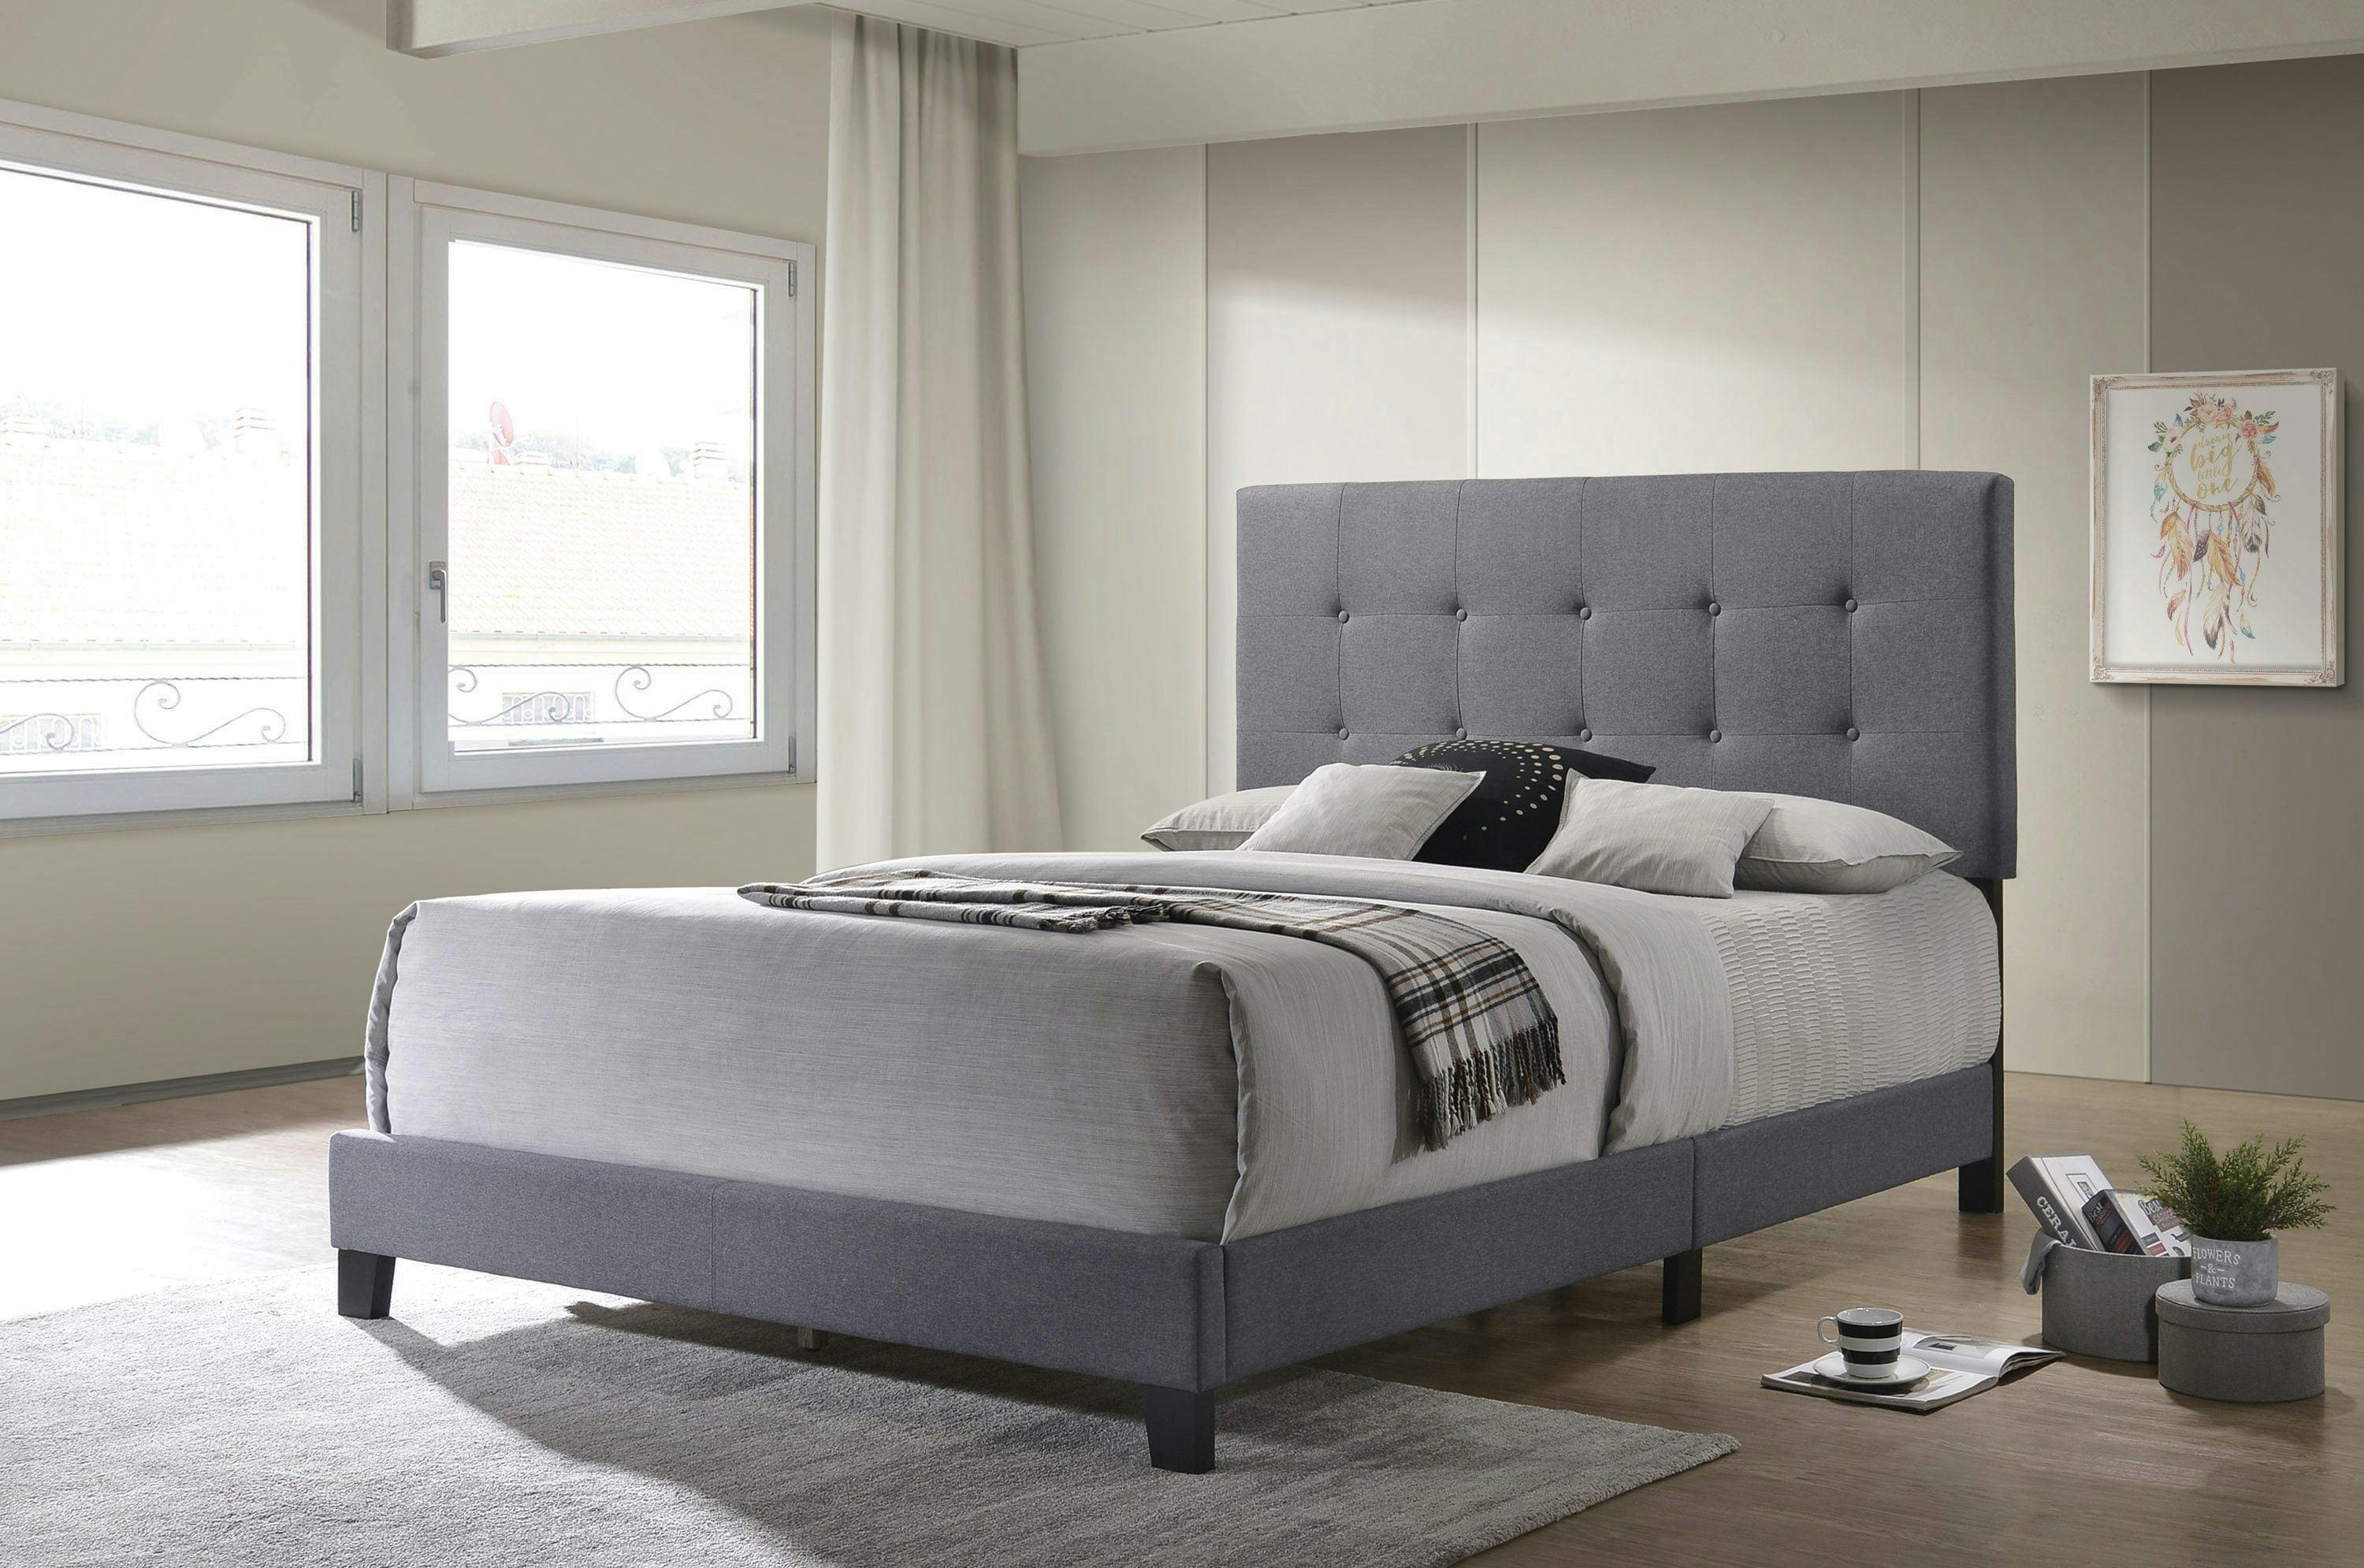 Transitional Tufted Gray Upholstered King Bed with Wood Frame